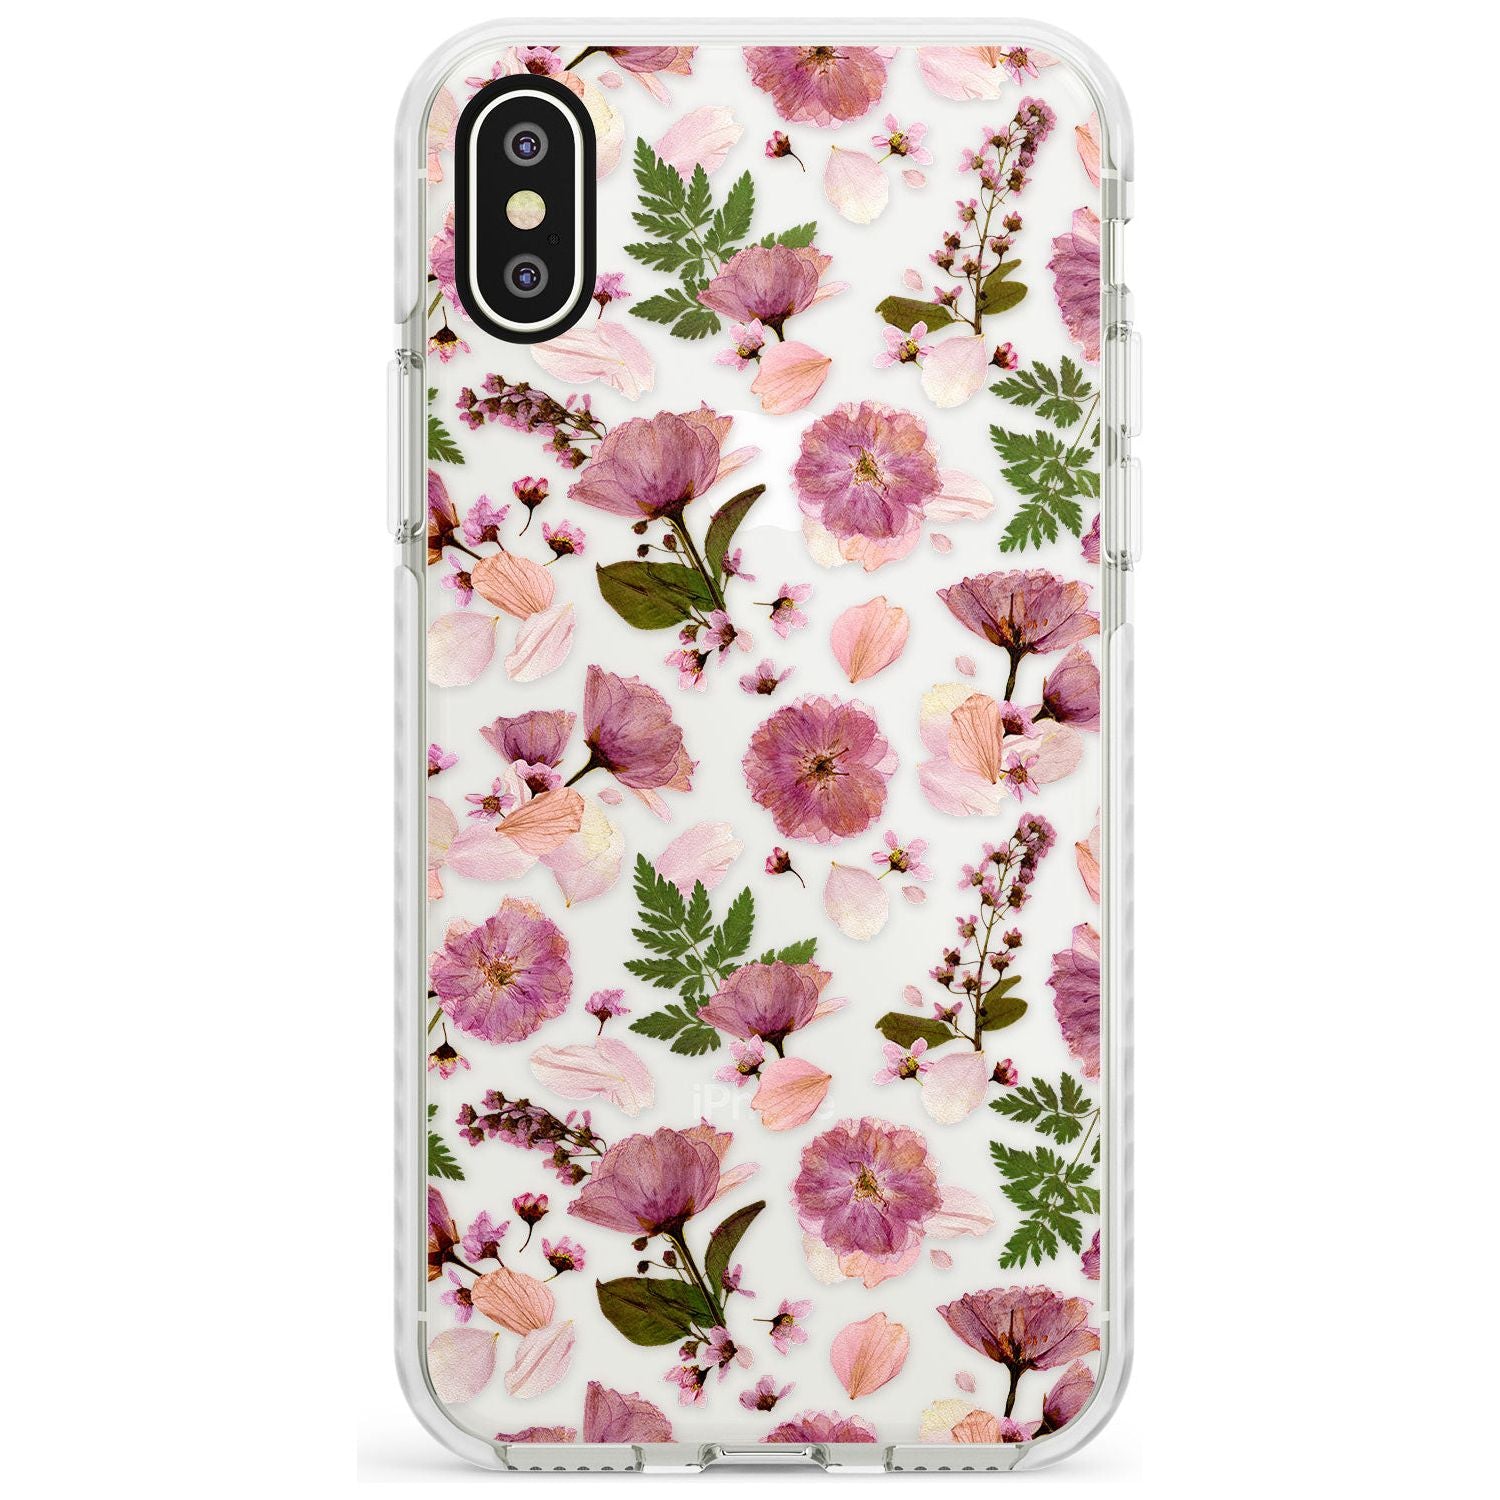 Floral Menagerie Transparent Design Impact Phone Case for iPhone X XS Max XR